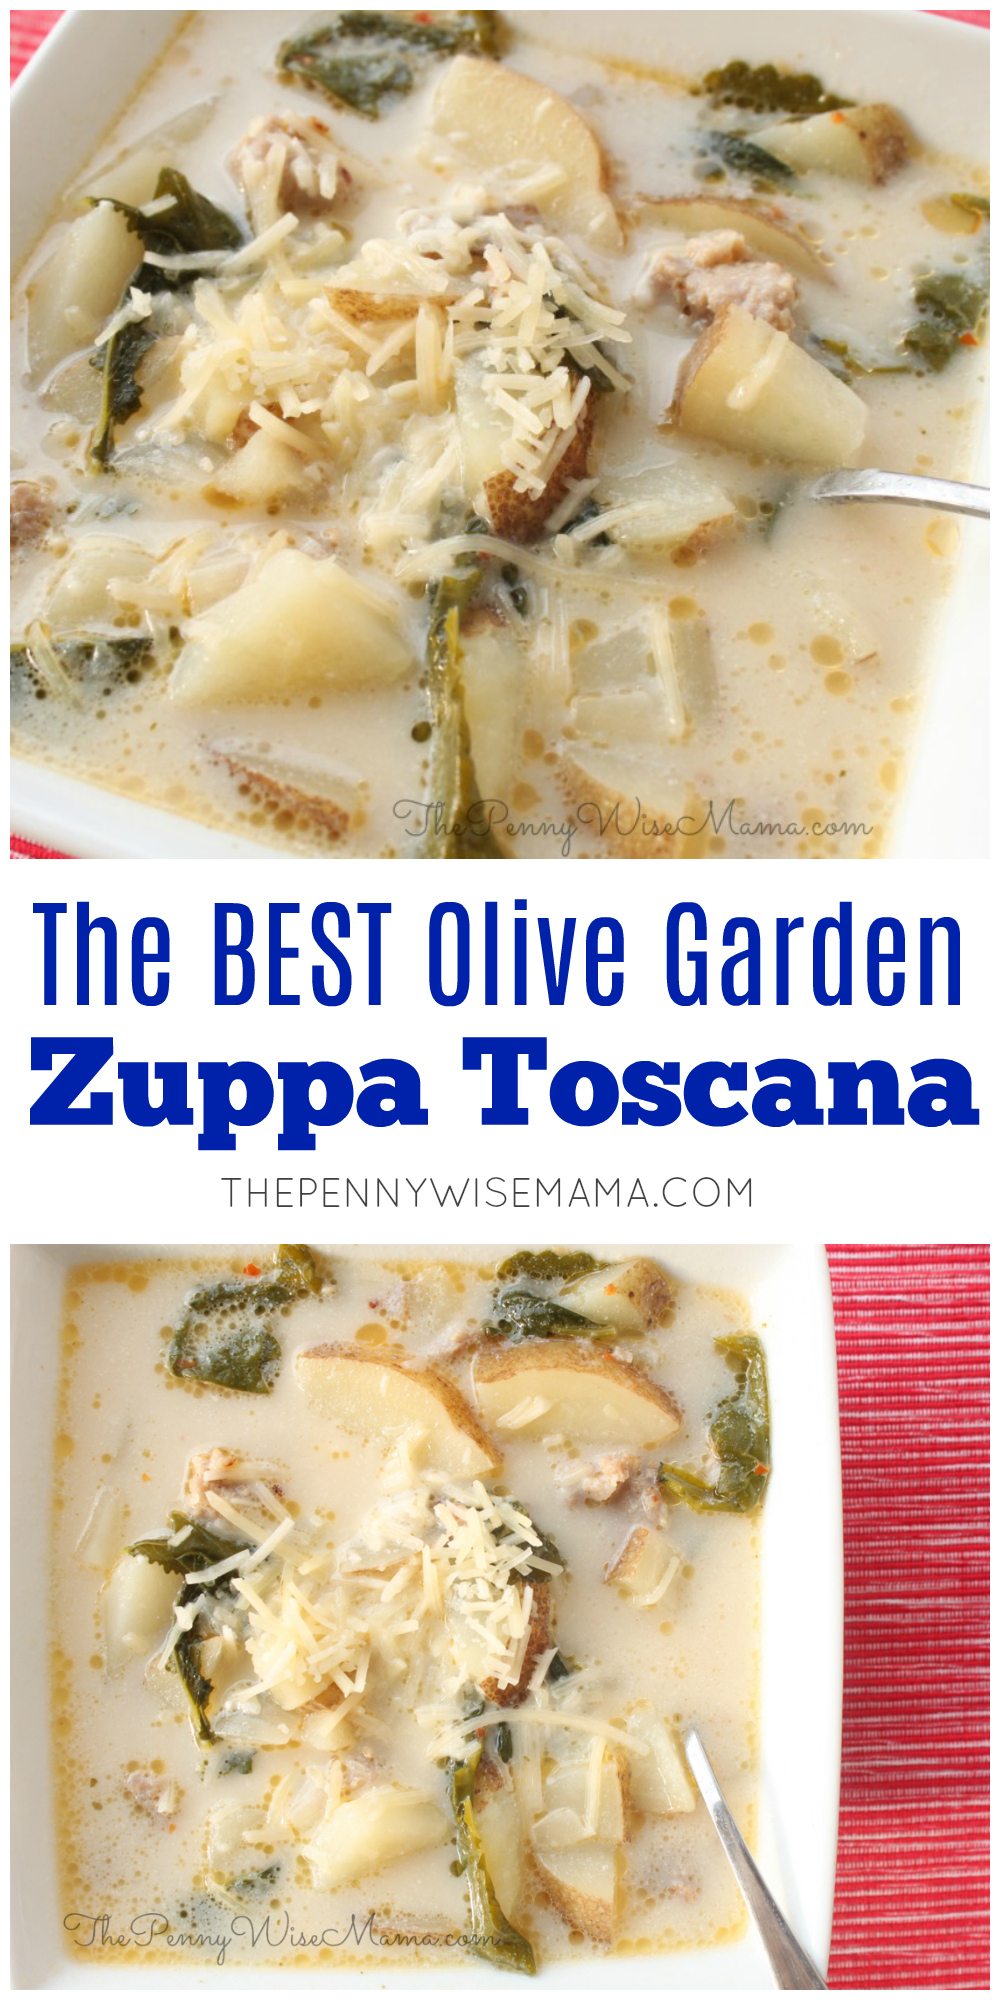 The BEST Copycat Olive Garden Zuppa Toscana soup recipe - so yummy and simple to make!